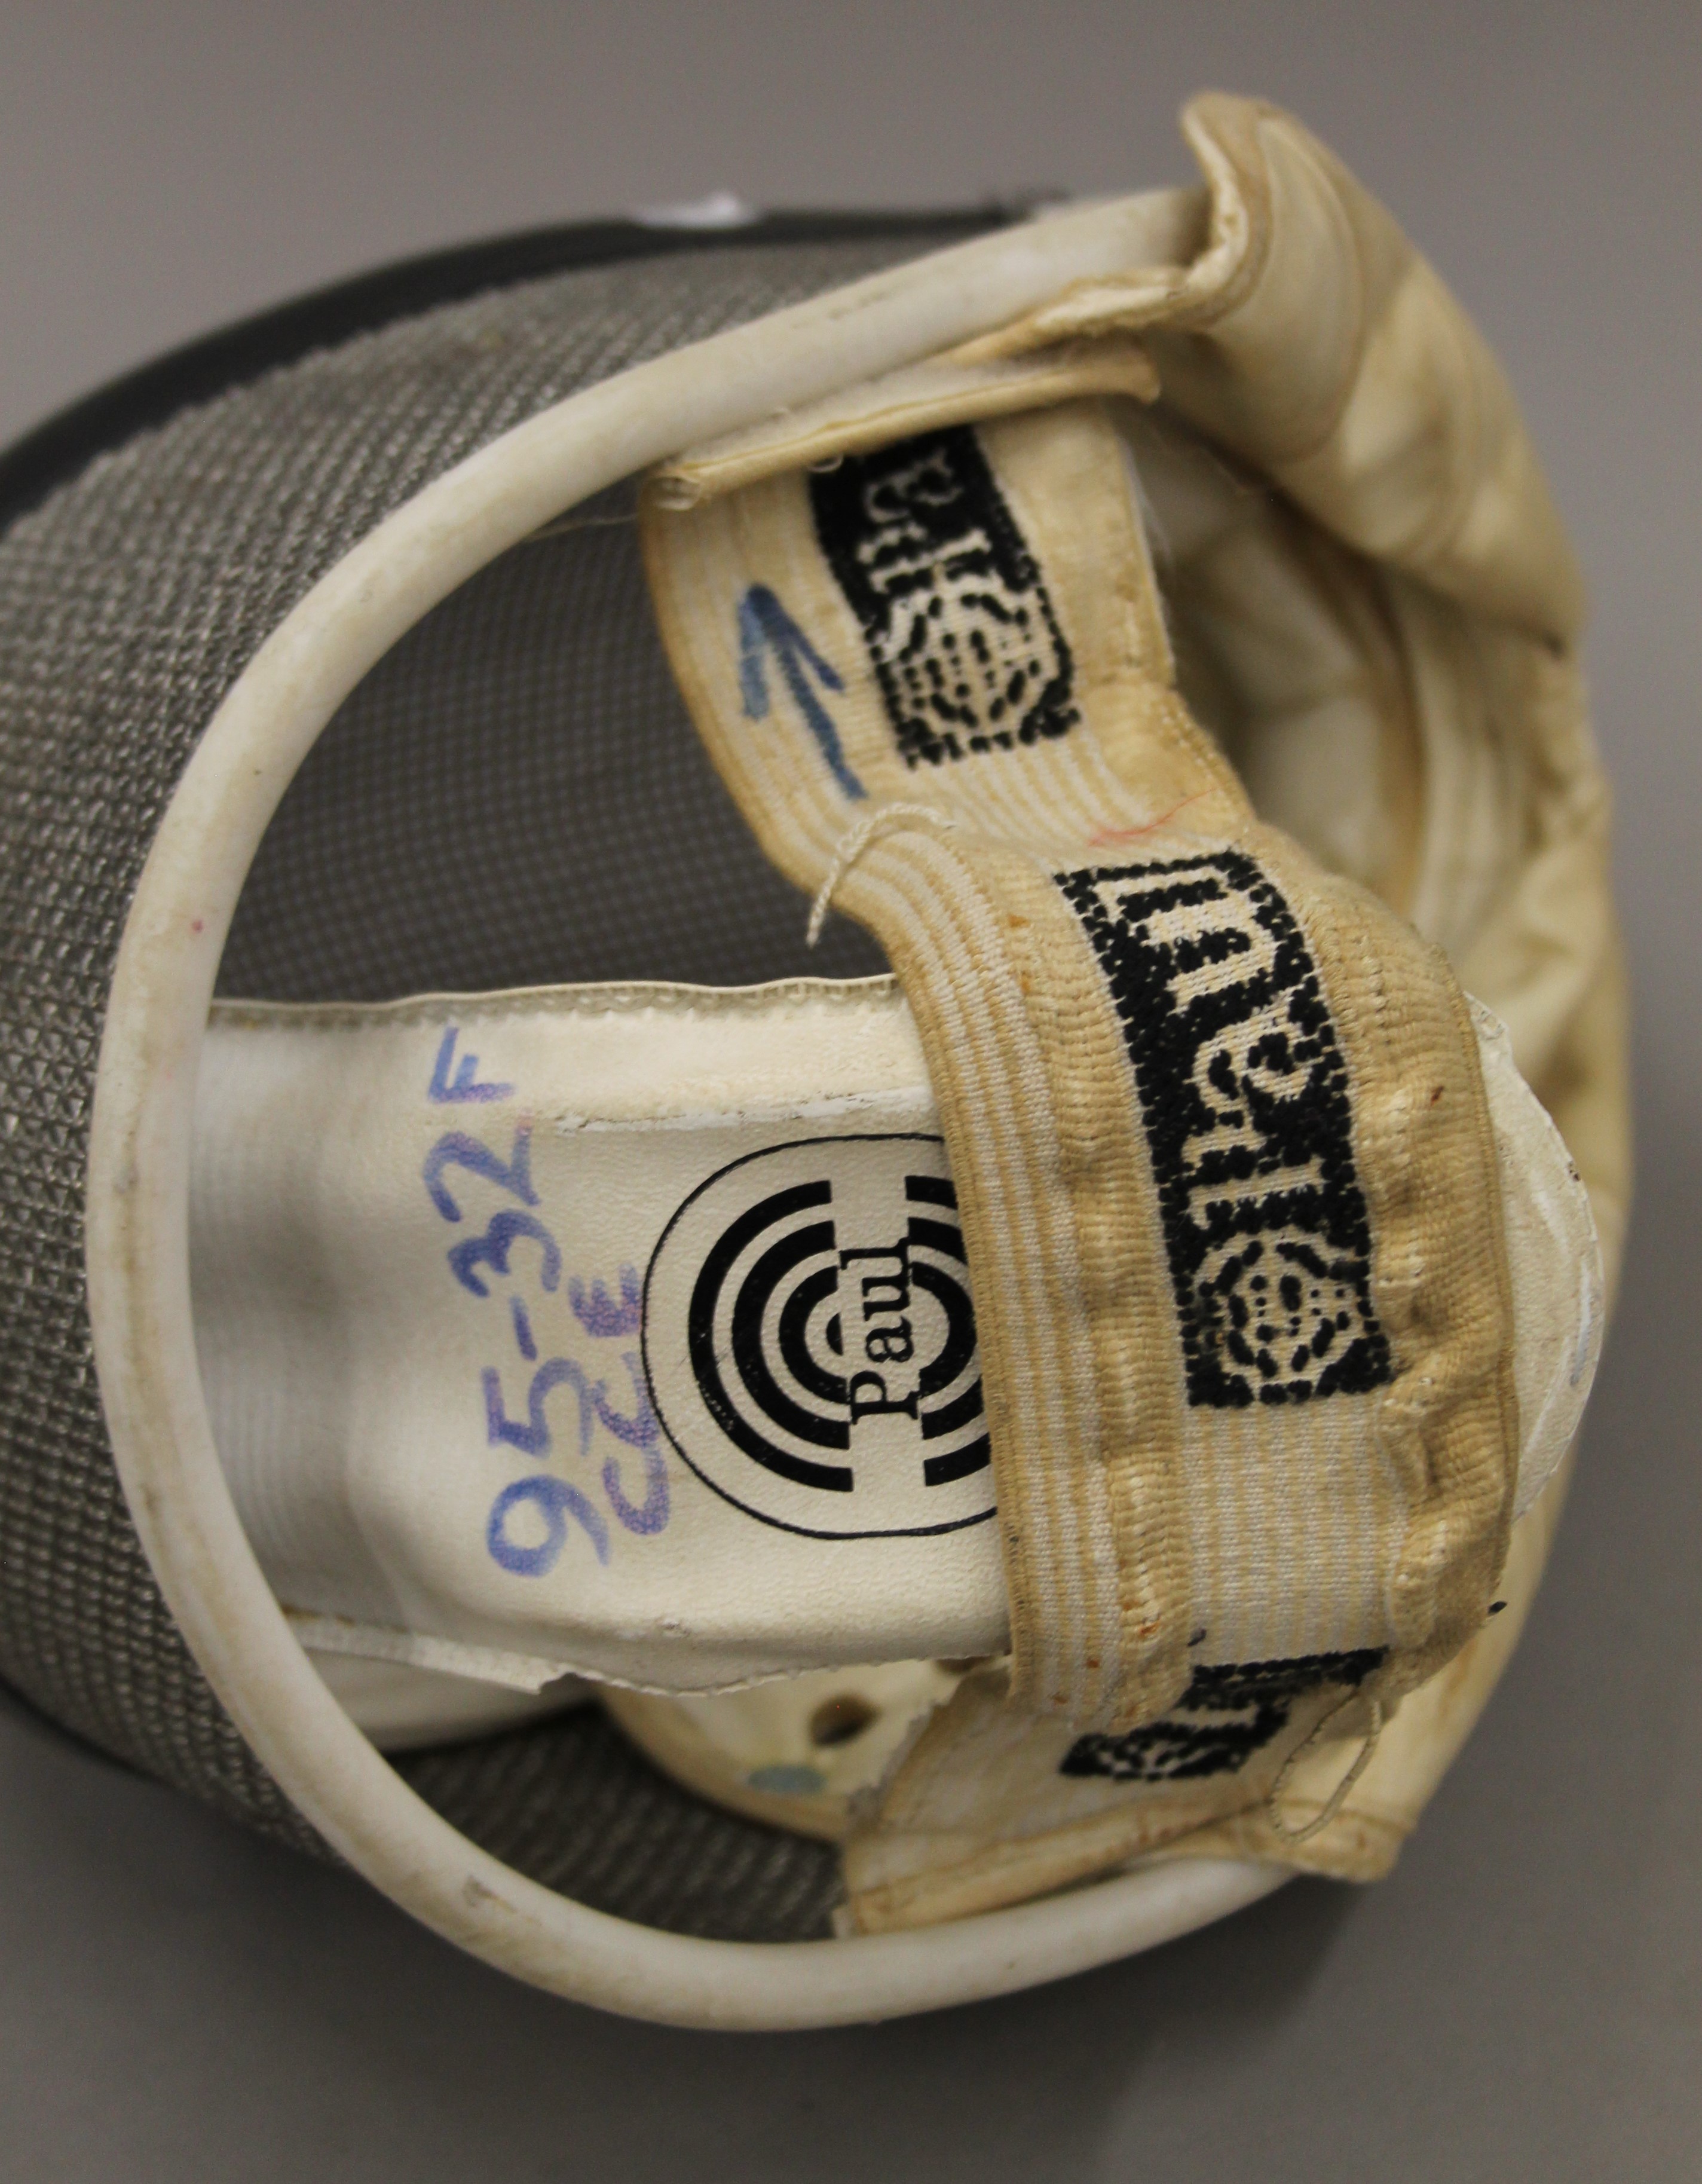 A Leon Paul fencing mask. - Image 3 of 3